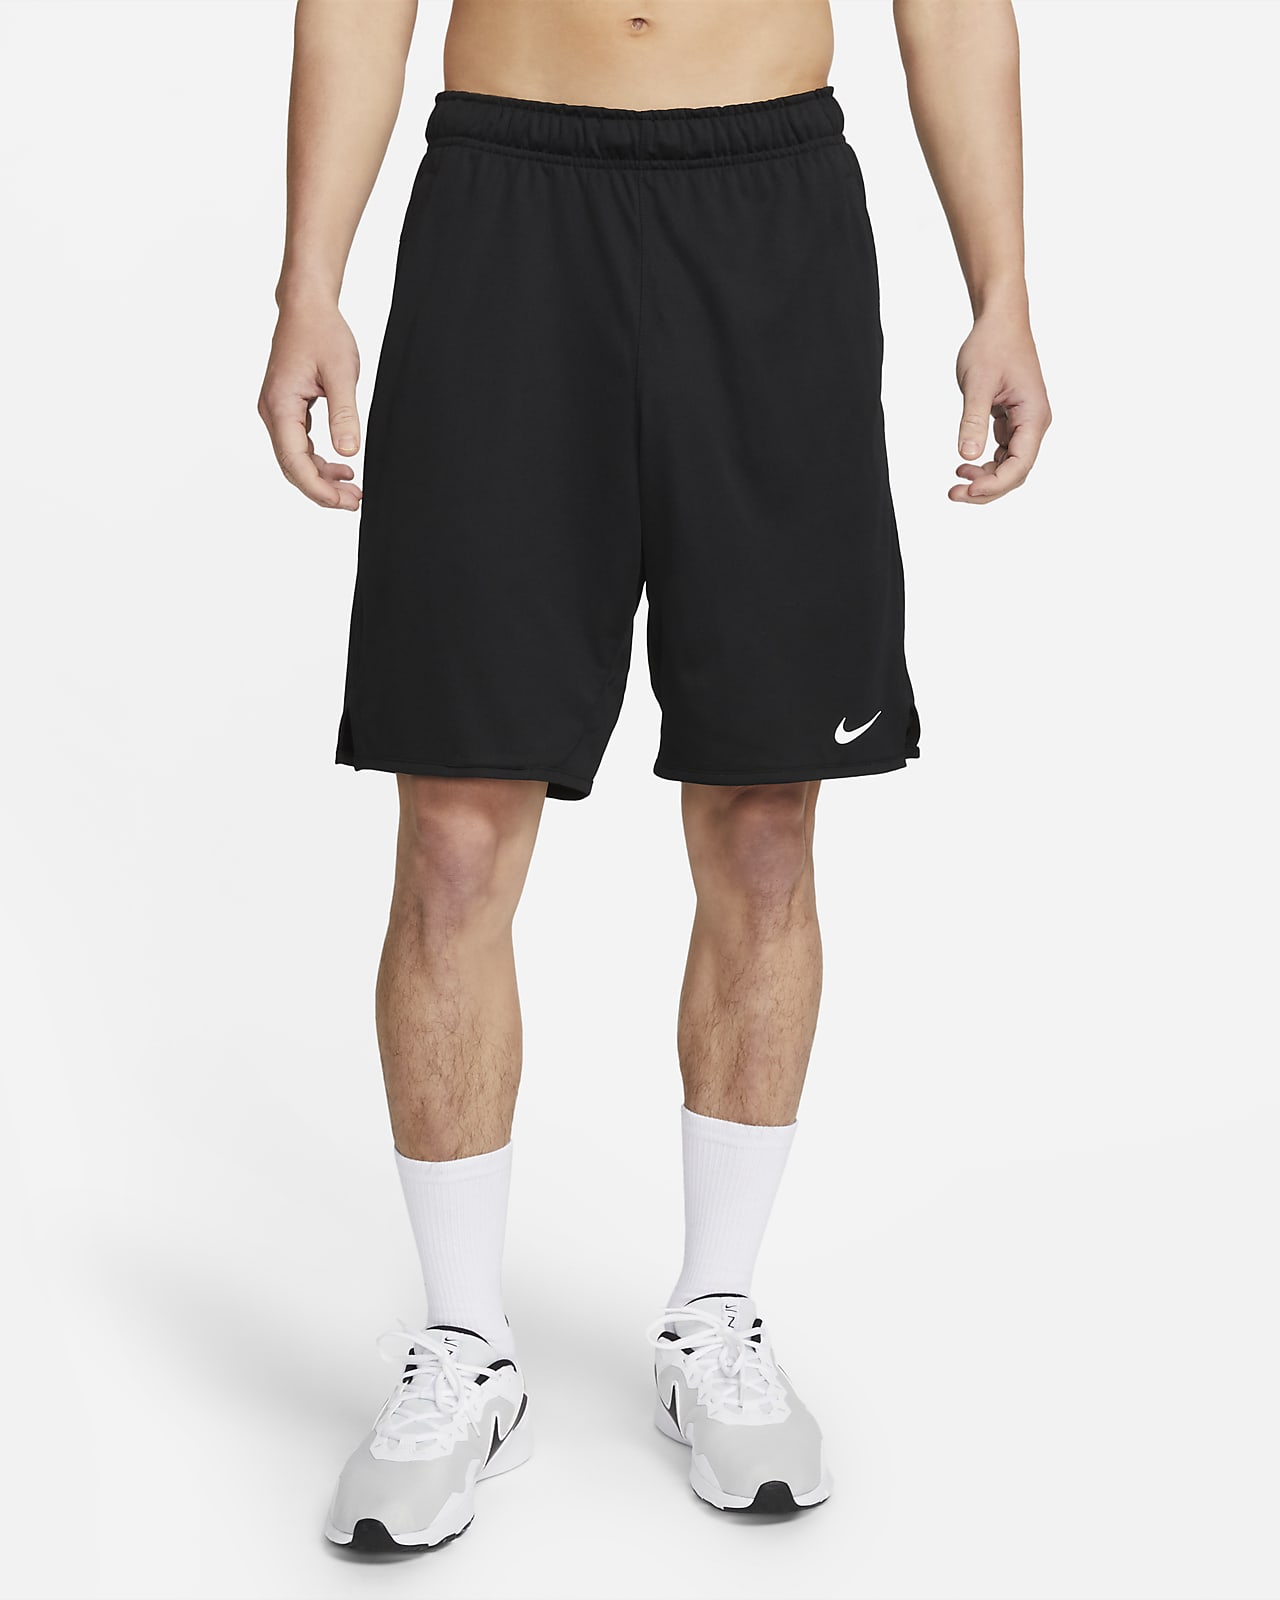 Nike Dri-FIT Totality Men's 23cm (approx.) Unlined Shorts